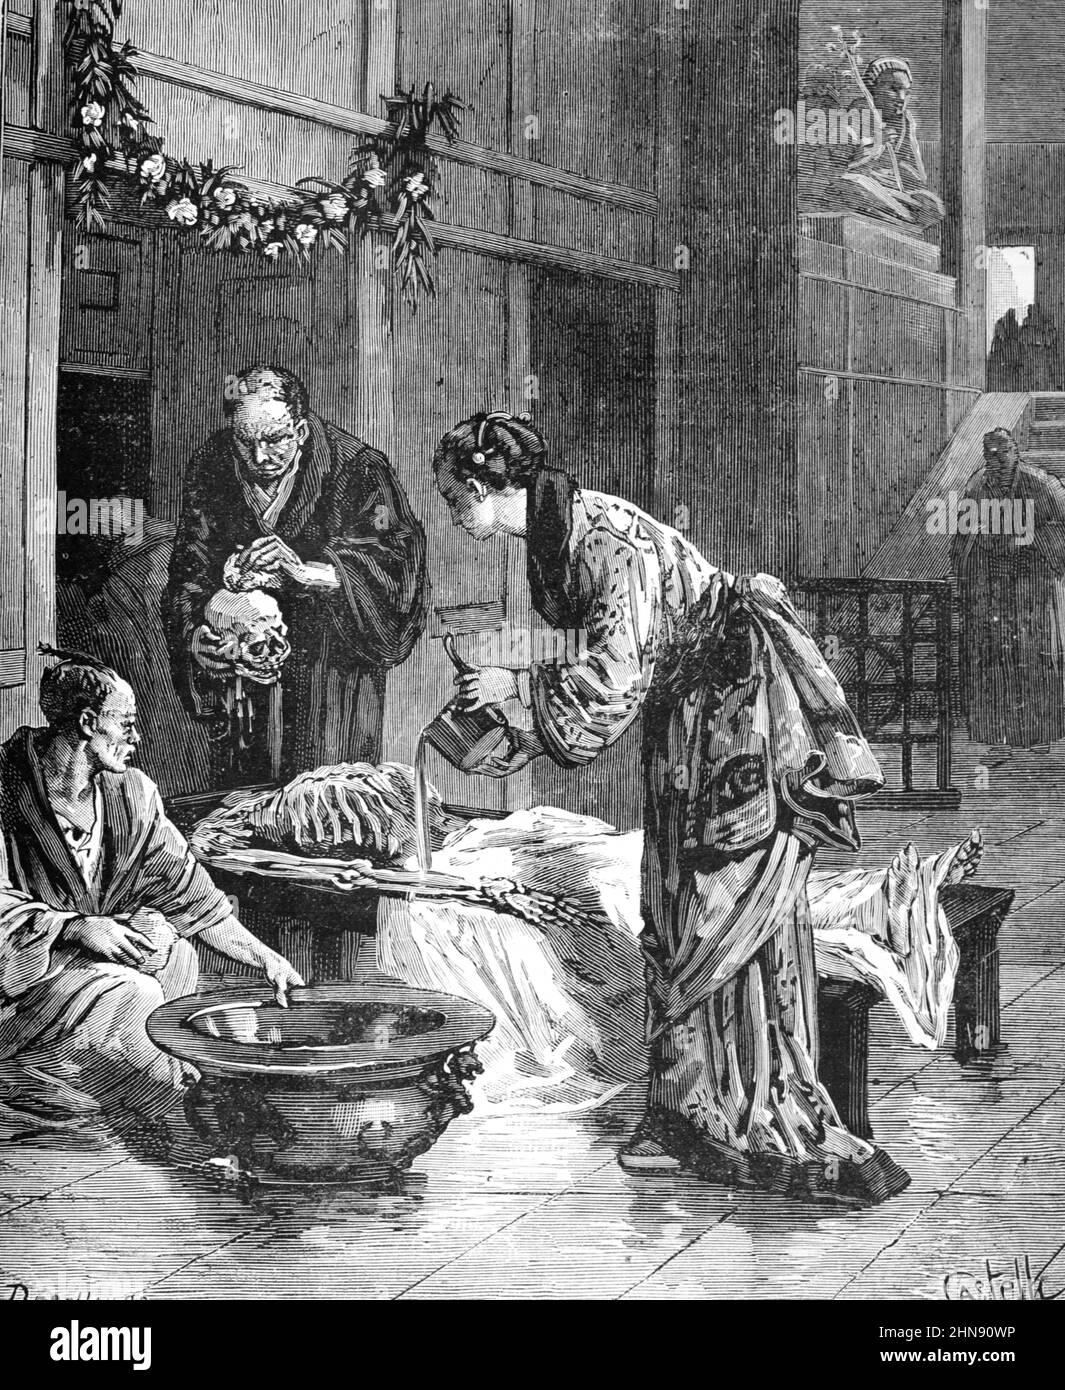 Death Ritual Washing Skeletons in Shinto Temple Japan. Vintage Illustration or Engraving 1883 (Deschamps-Castelli) Stock Photo